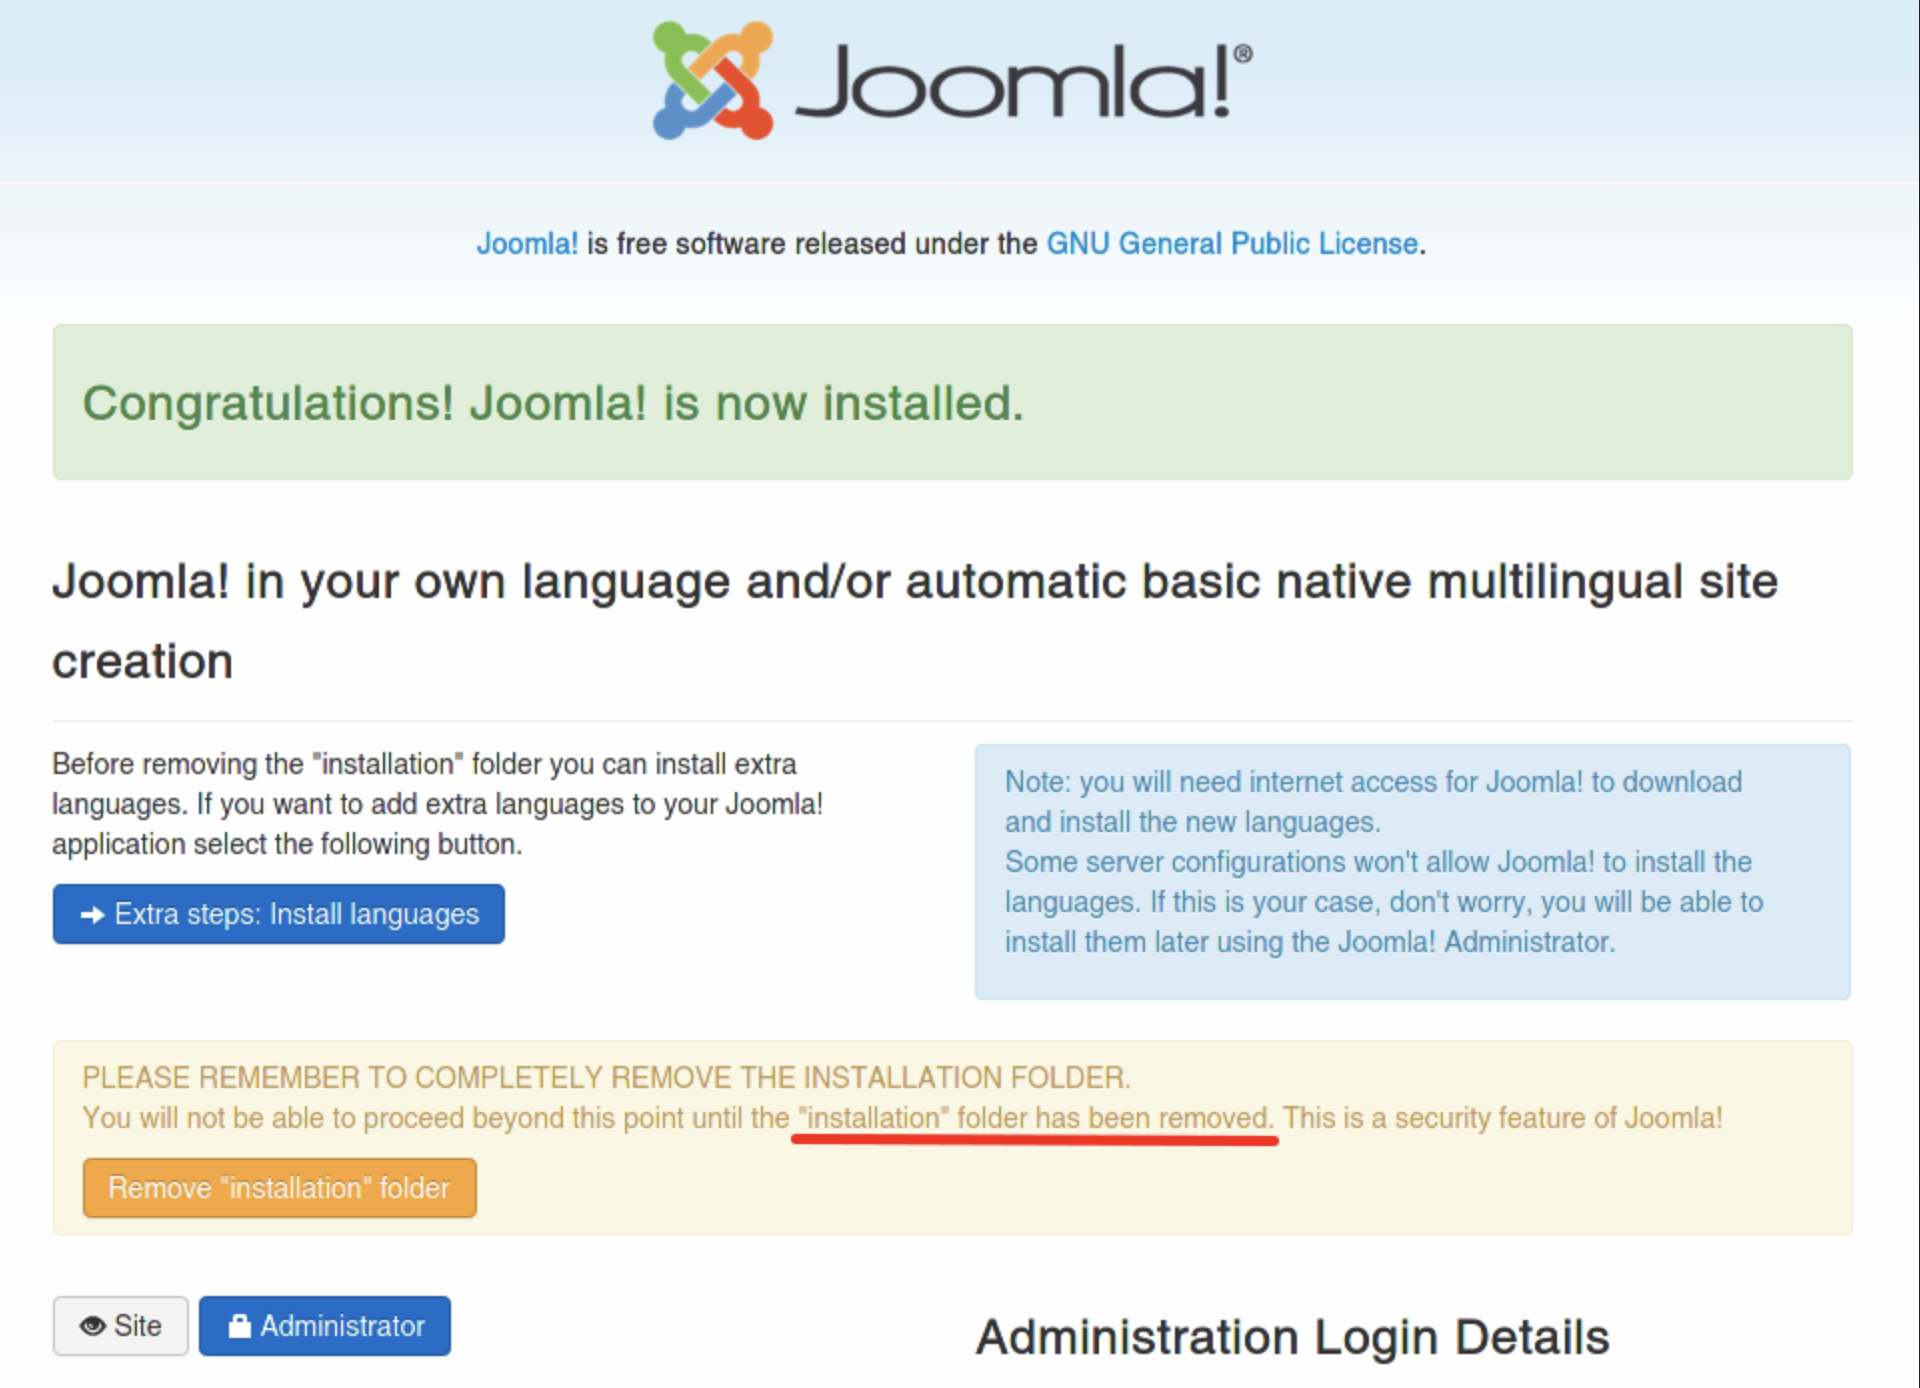 Success message in Joomla after installing it